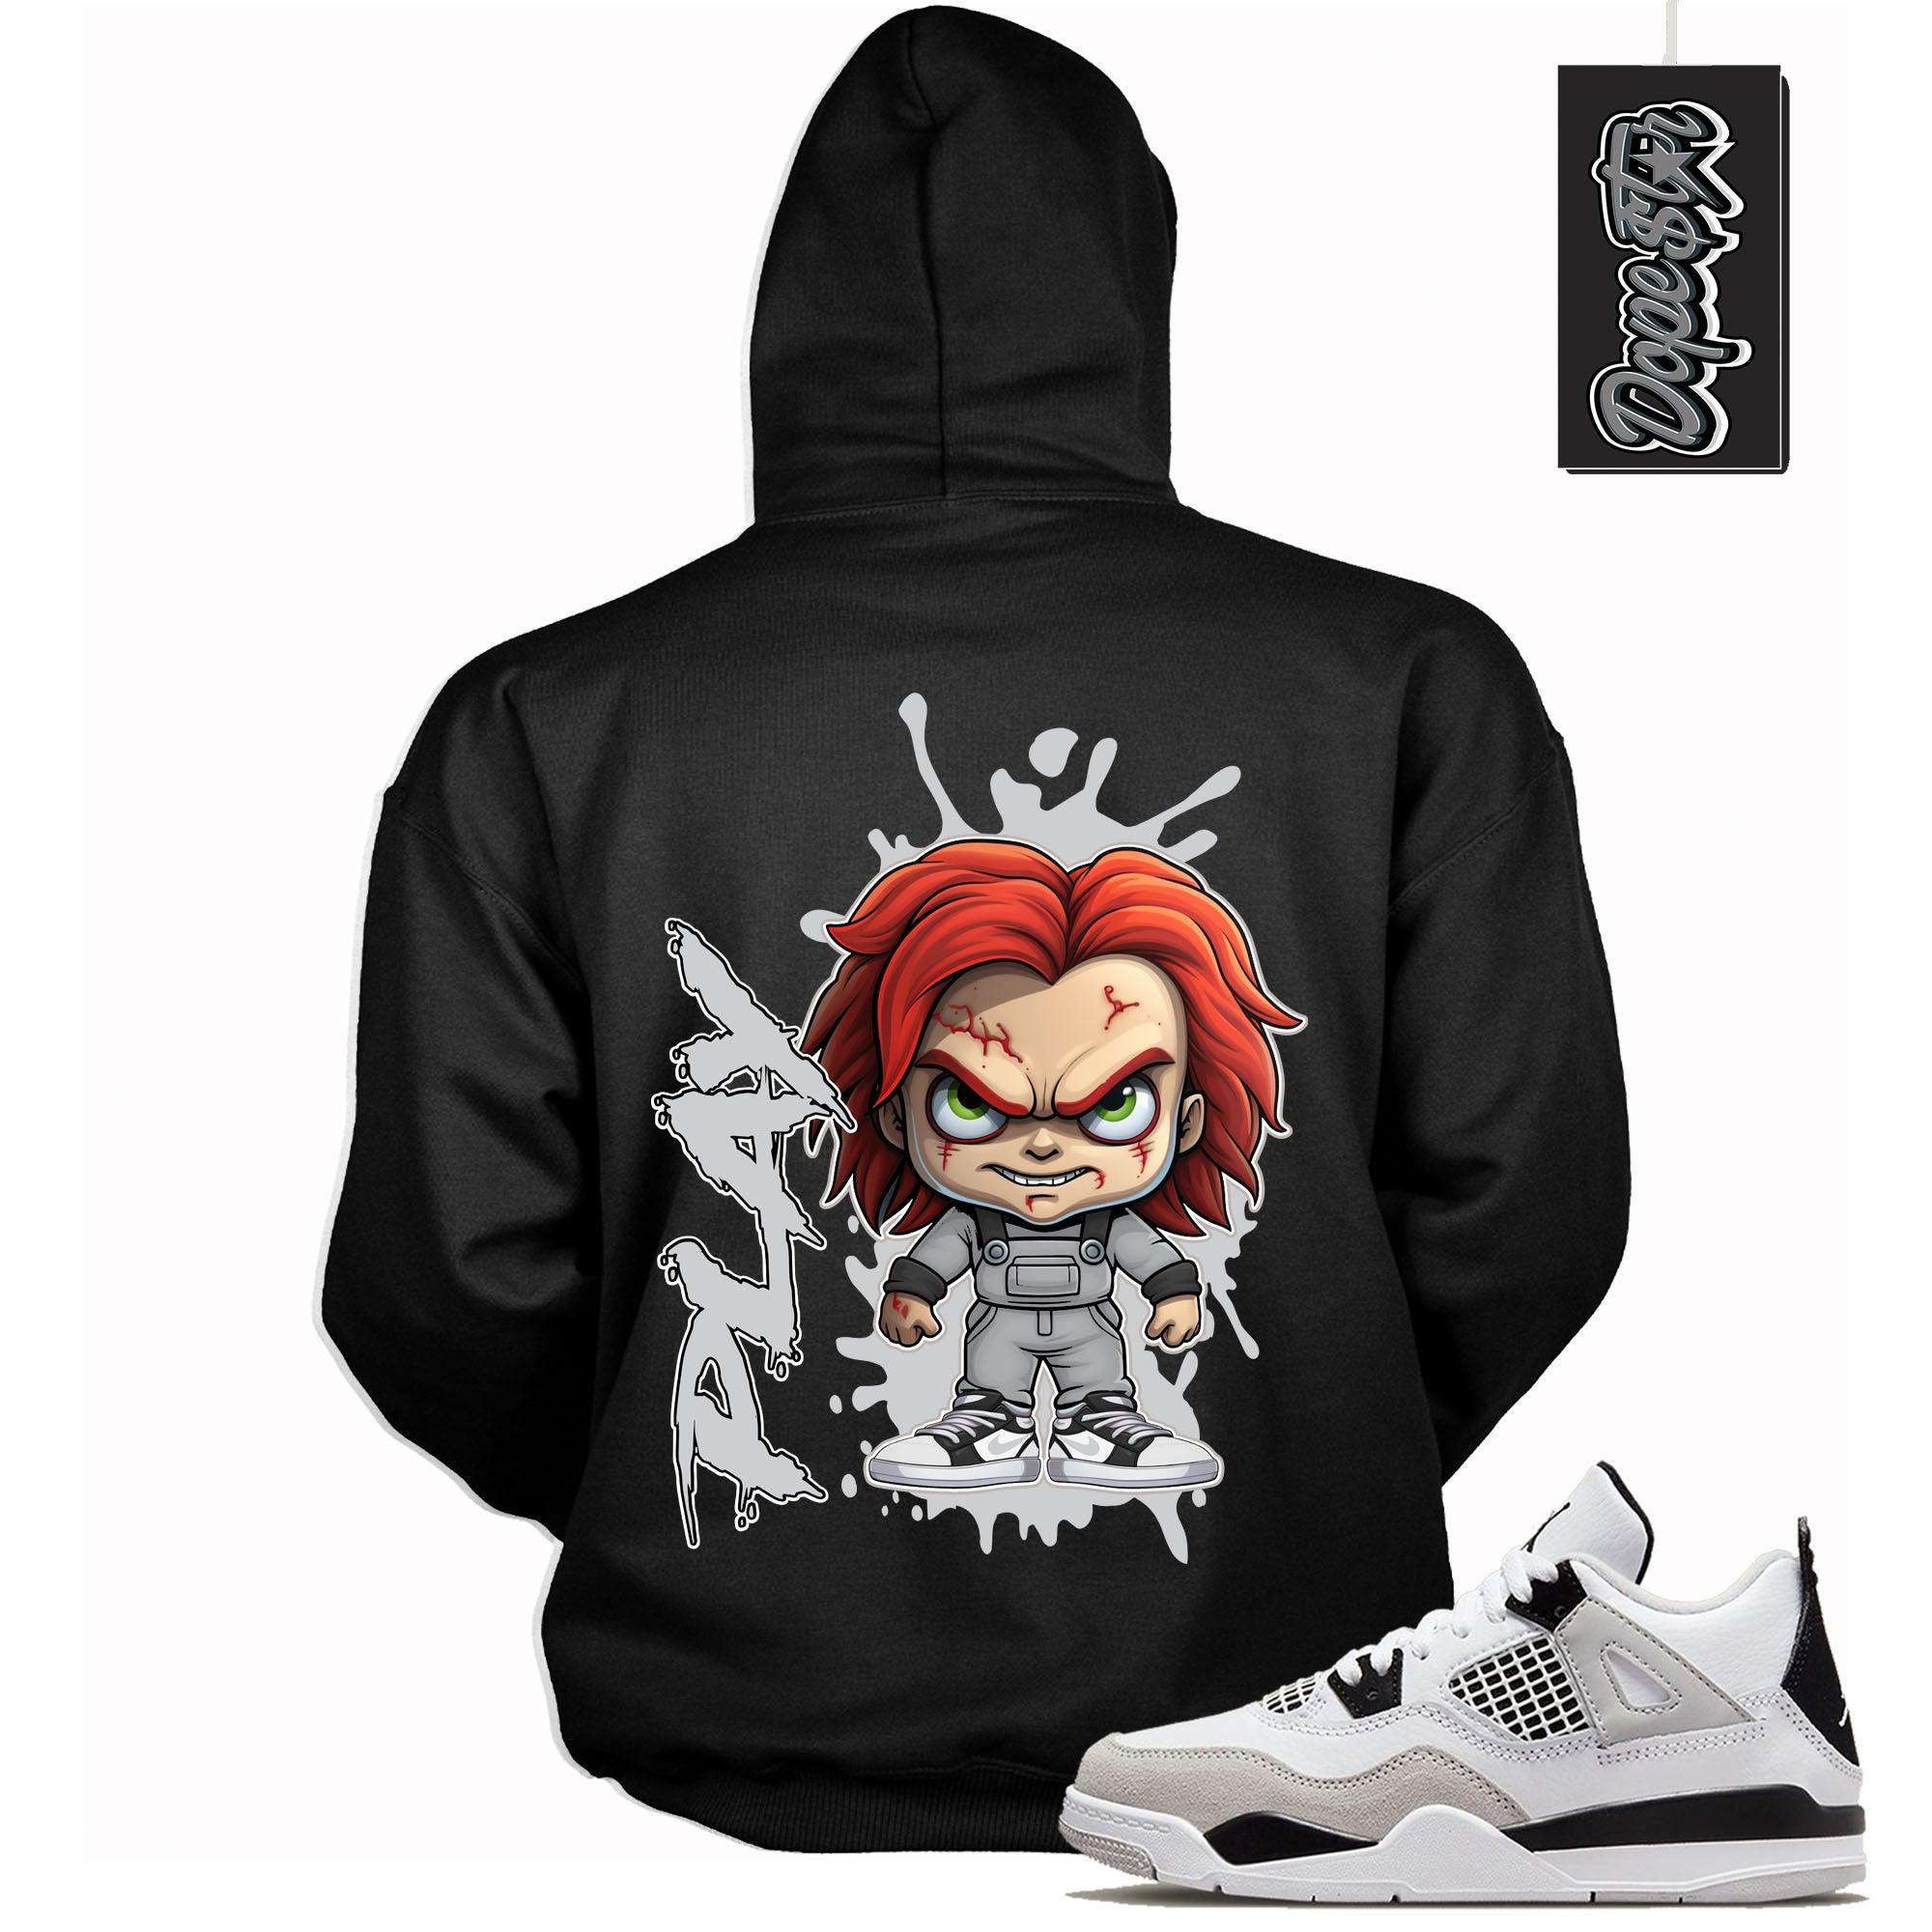 Cool Black Hoodie With Chucky Play design That Perfectly Matches AIR JORDAN 4 RETRO MILITARY BLACK Sneakers